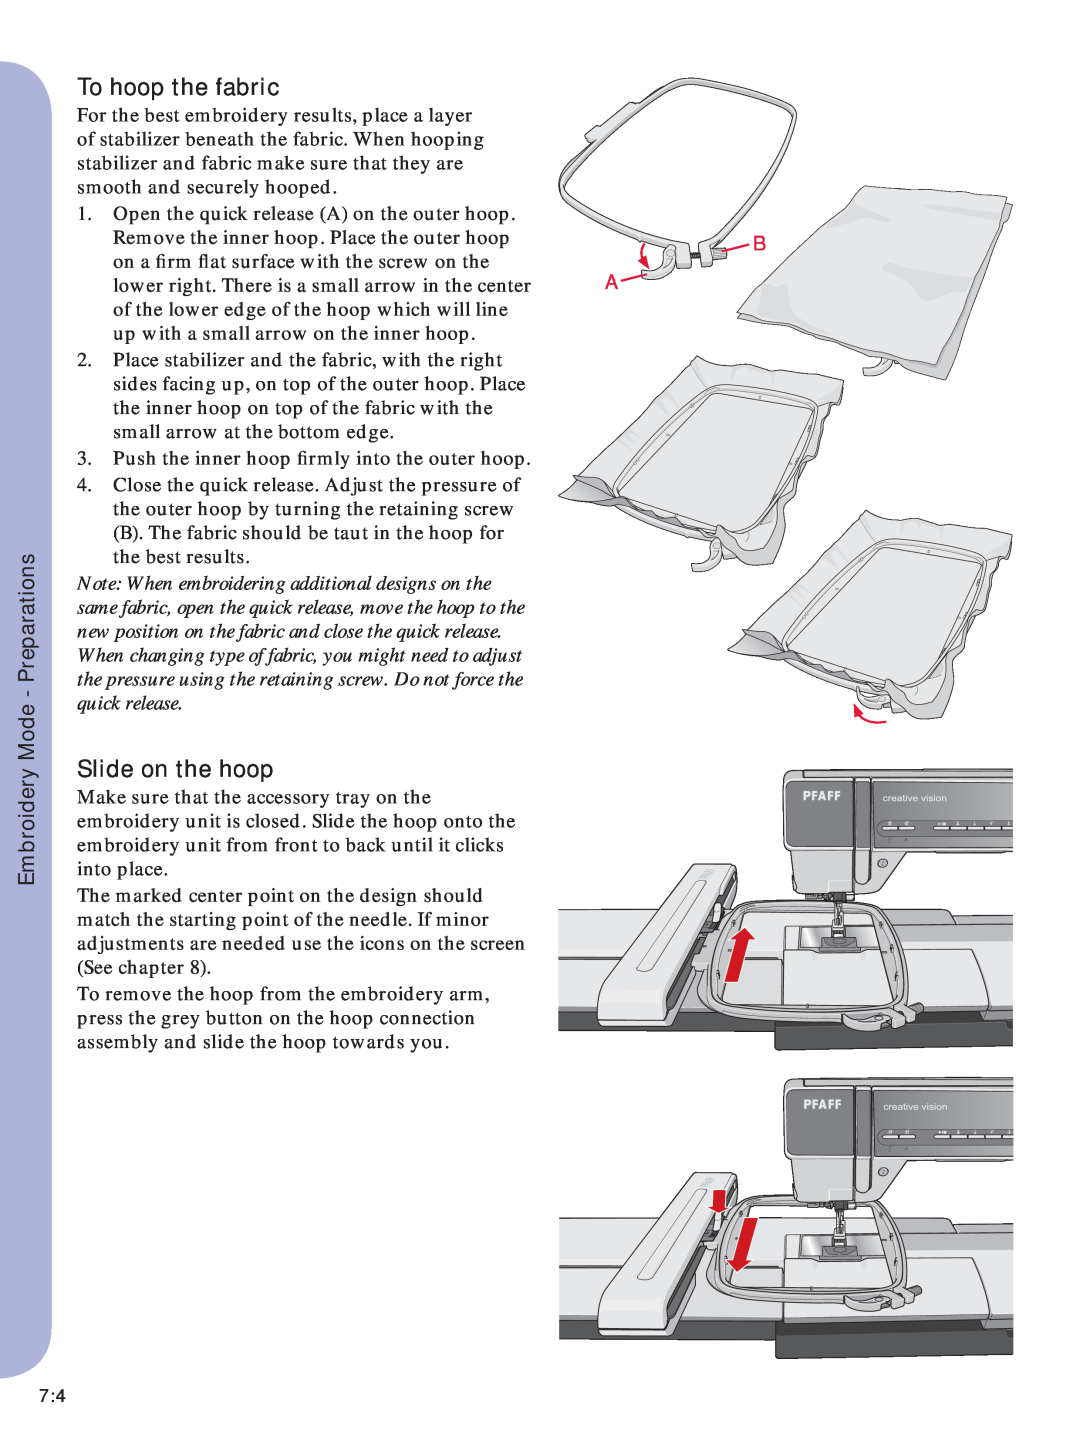 Pfaff Embroidery Machine manual To hoop the fabric, Slide on the hoop, Embroidery Mode - Preparations 